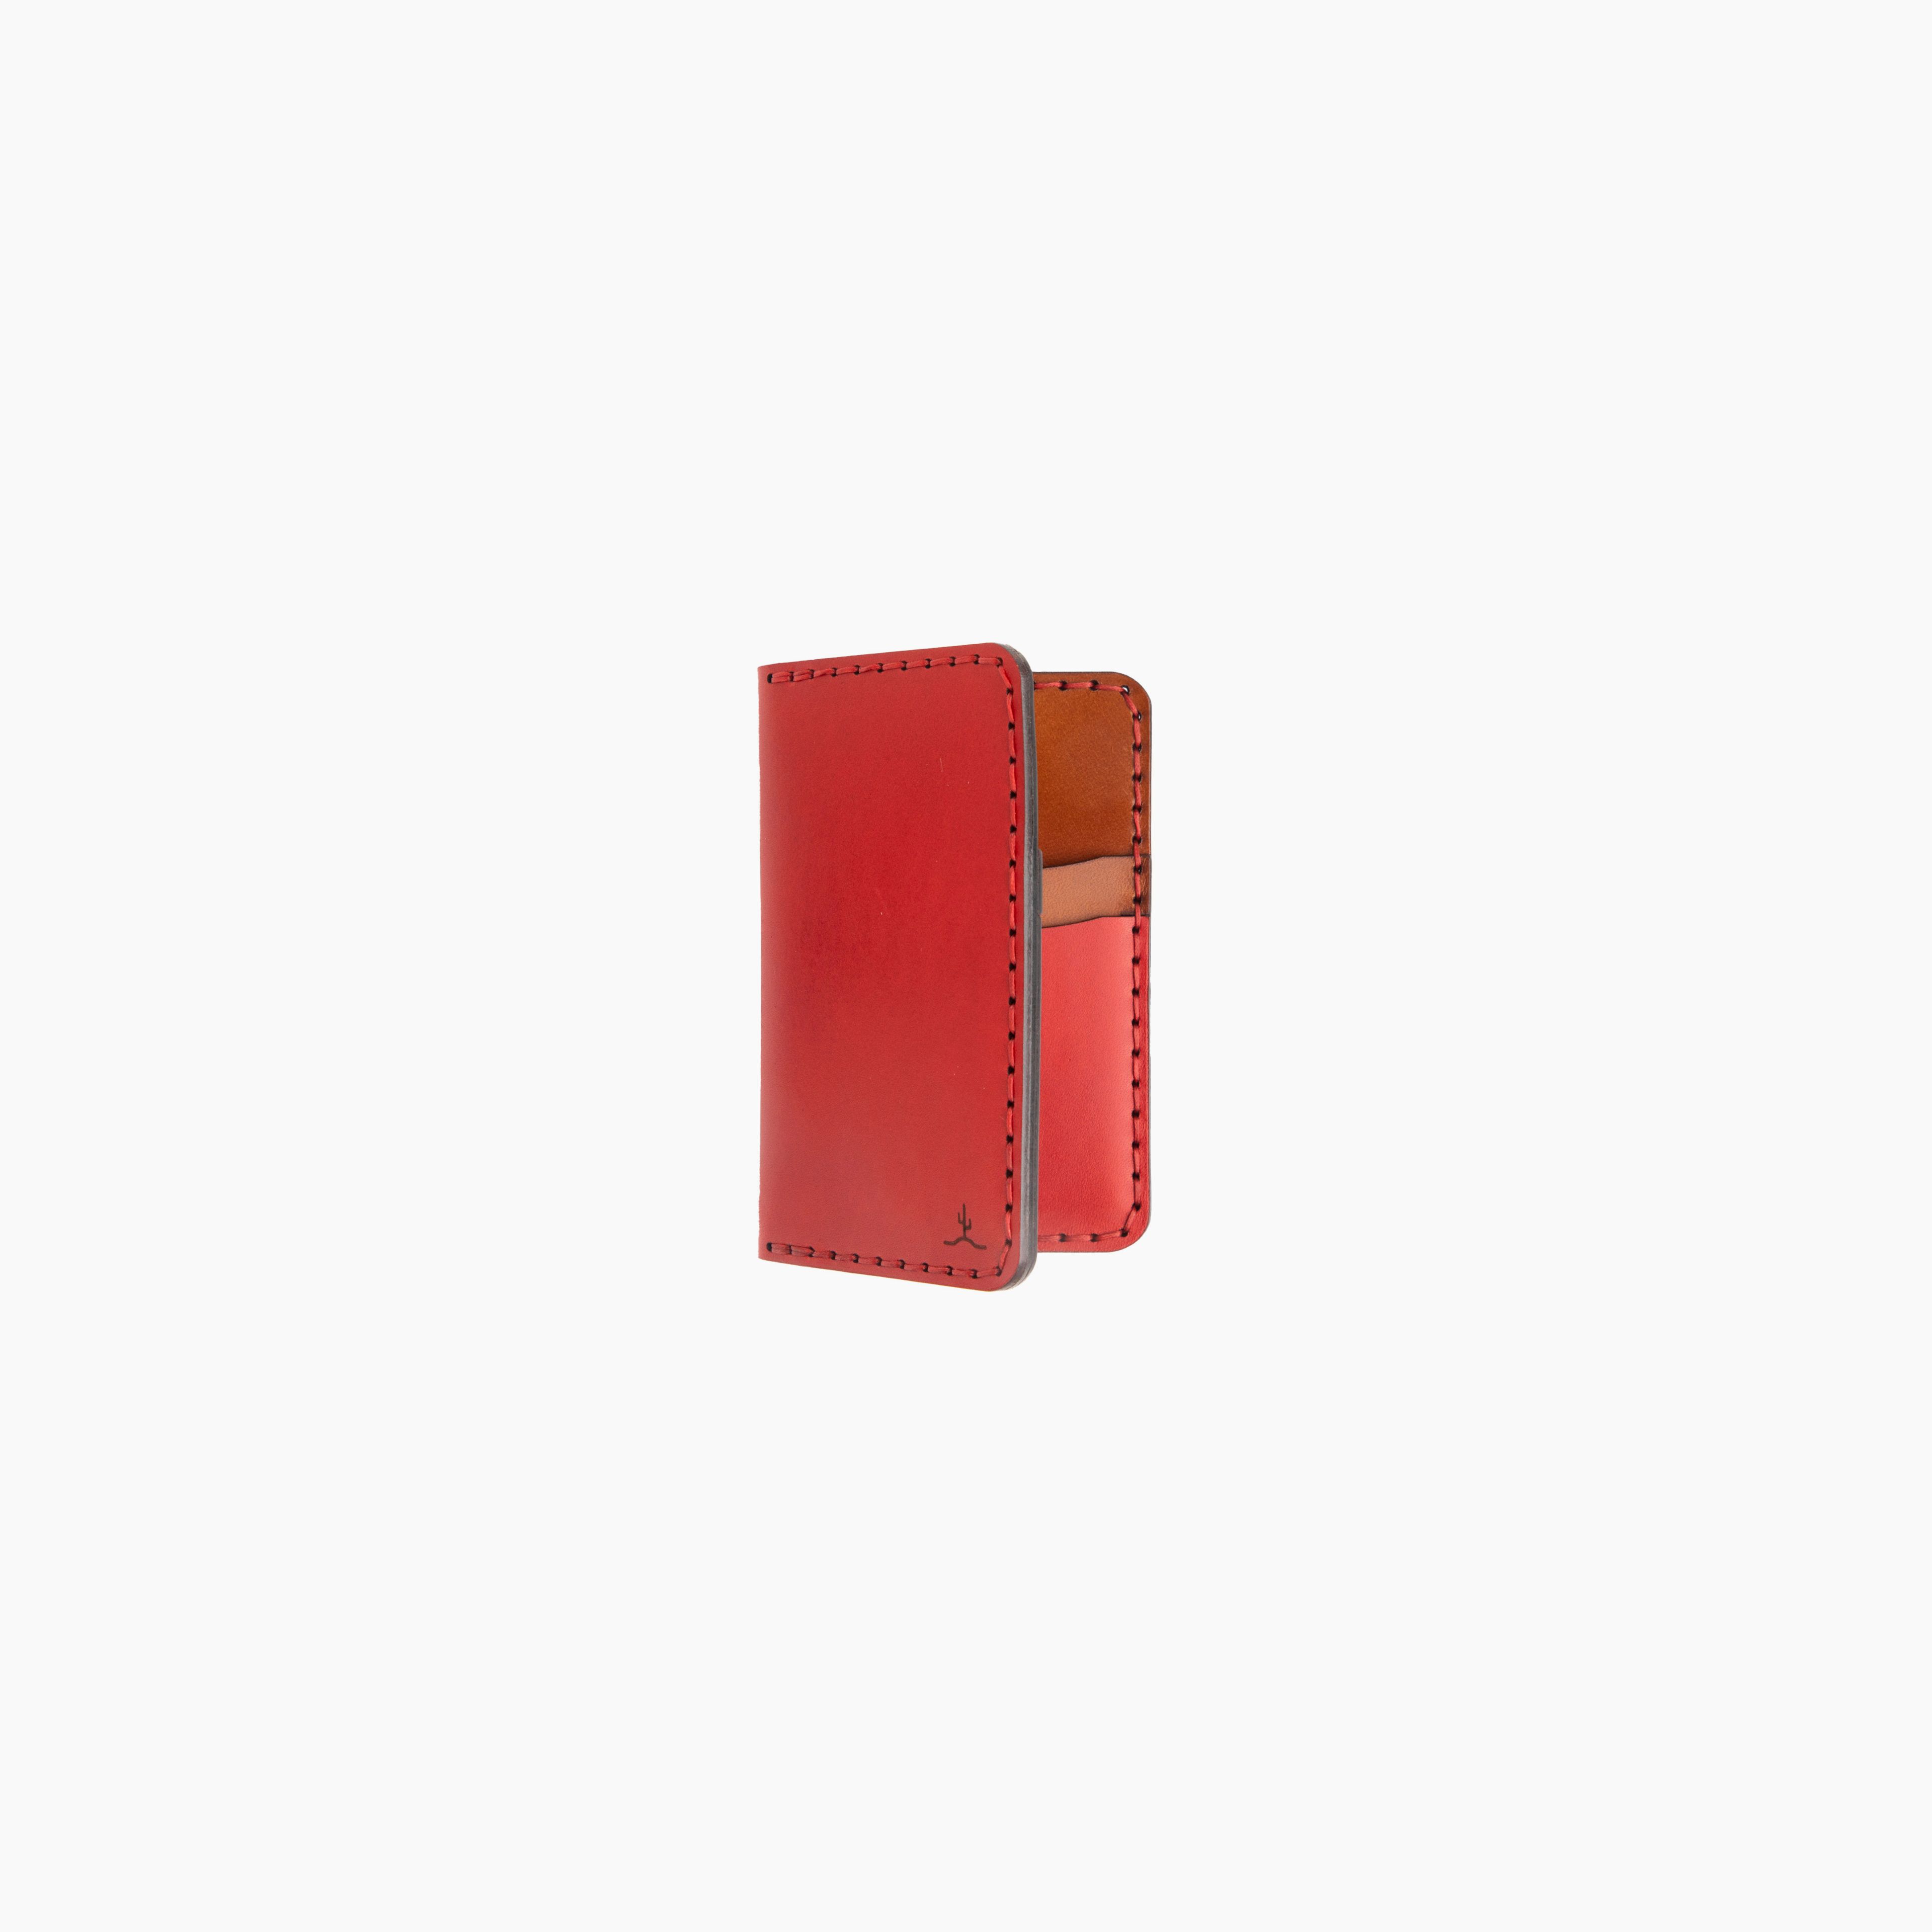 Vertical Primary - Red